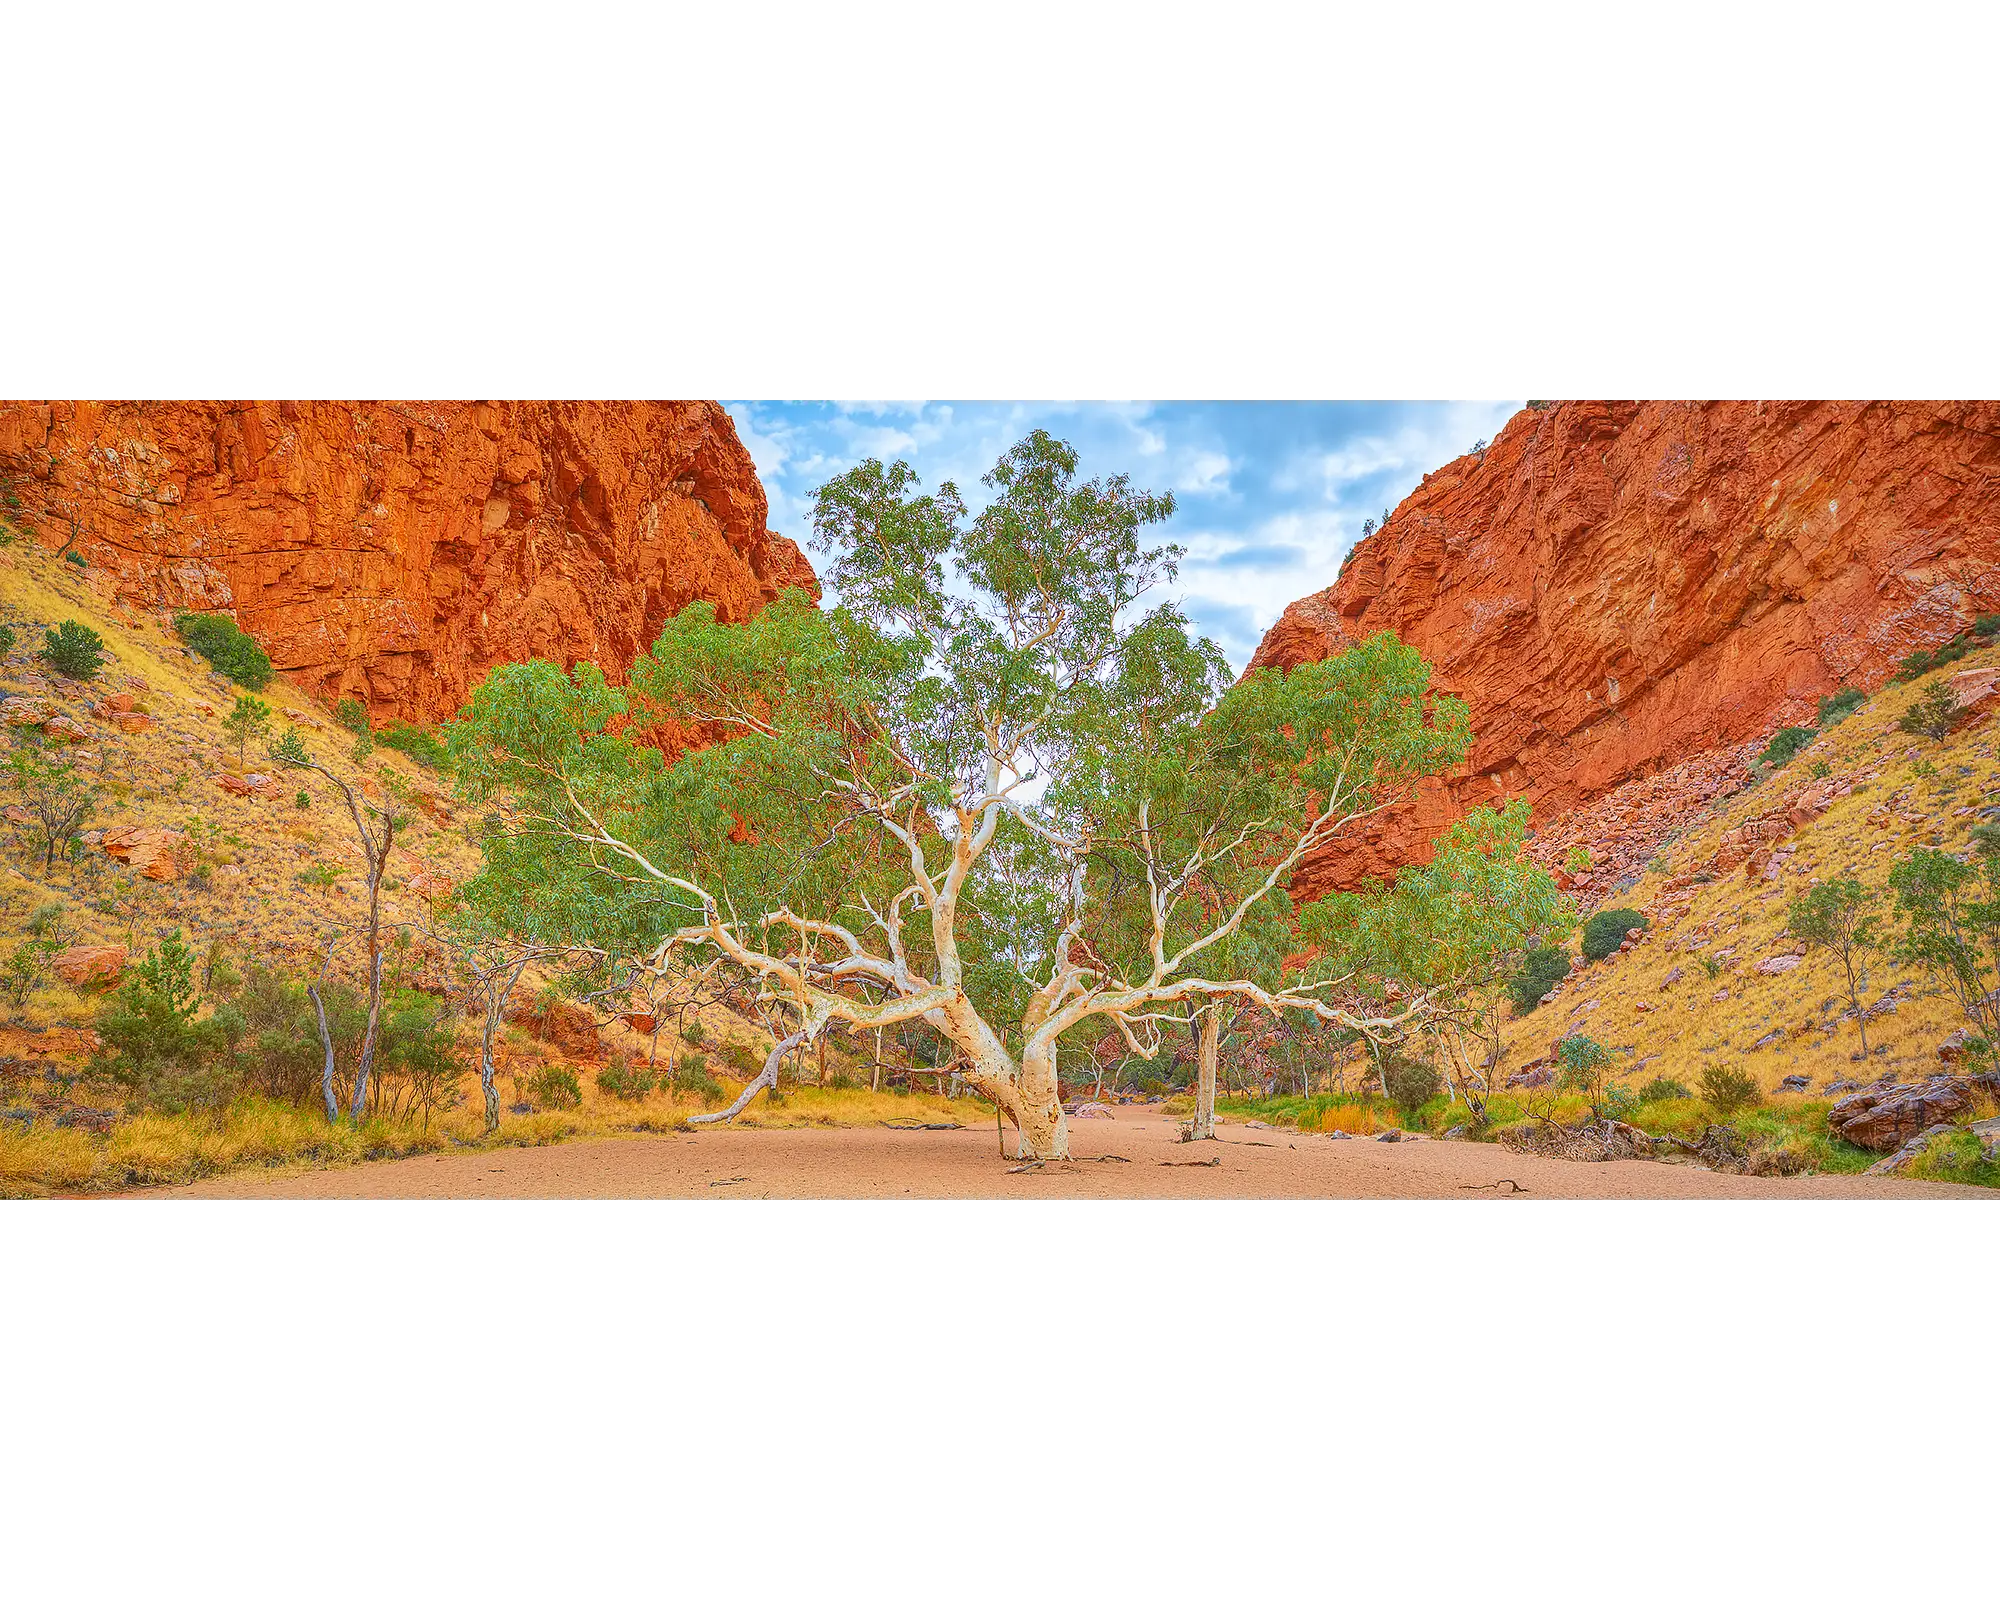 In The Middle. Ghost Gum, Simpson Gap, Northern Territory, Australia.